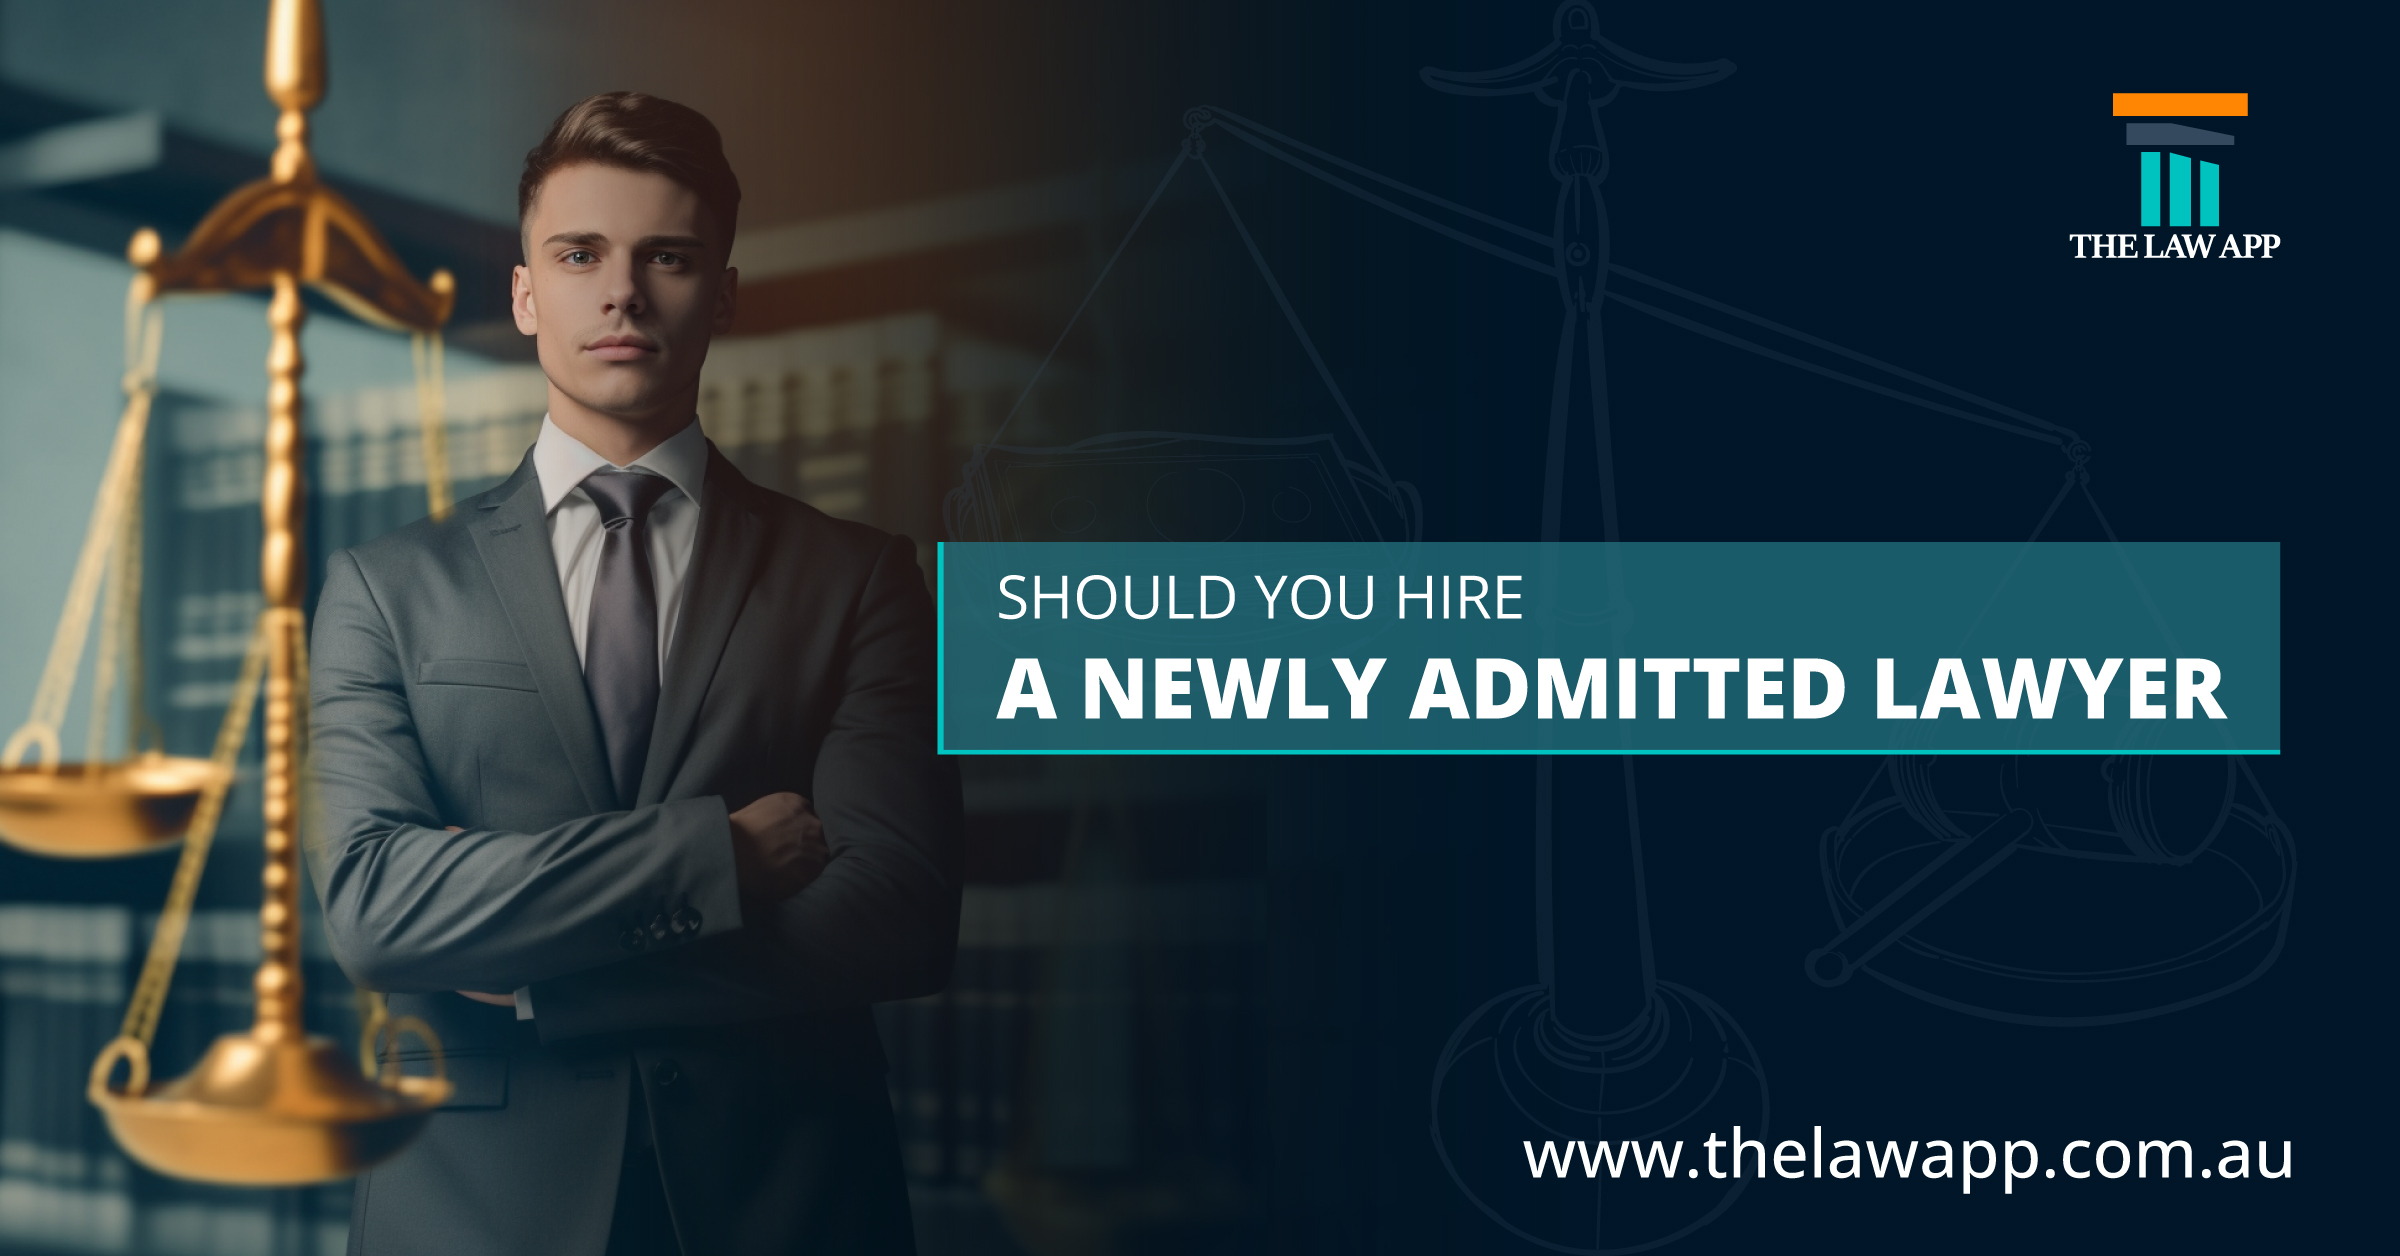 Should You Hire a Newly Admitted Lawyer?